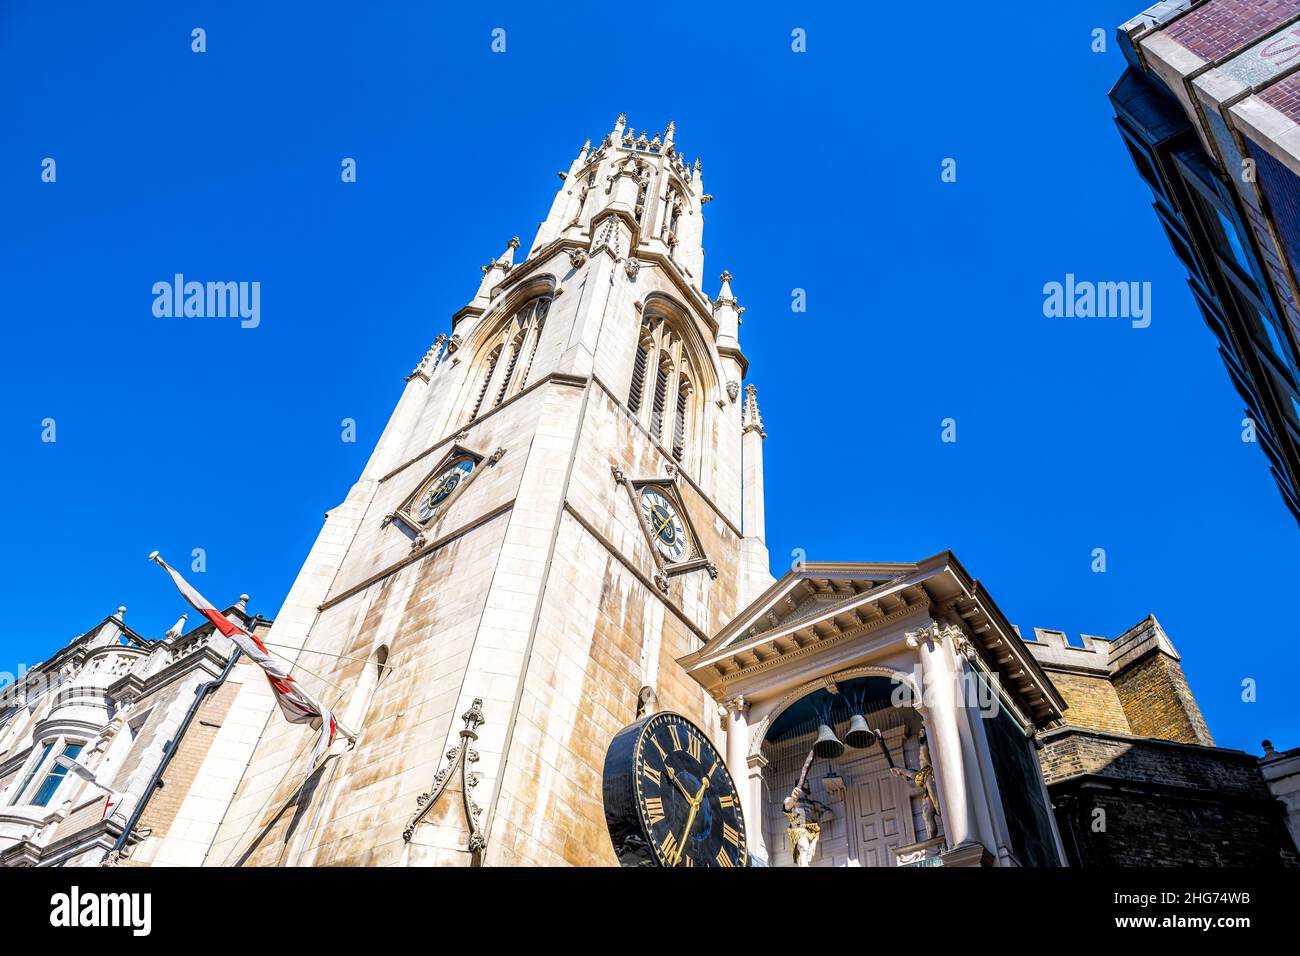 London, UK Low angle view looking up on St Dunstan-in-the-West church in center of downtown district city with old architecture on Fleet street and cl Stock Photo